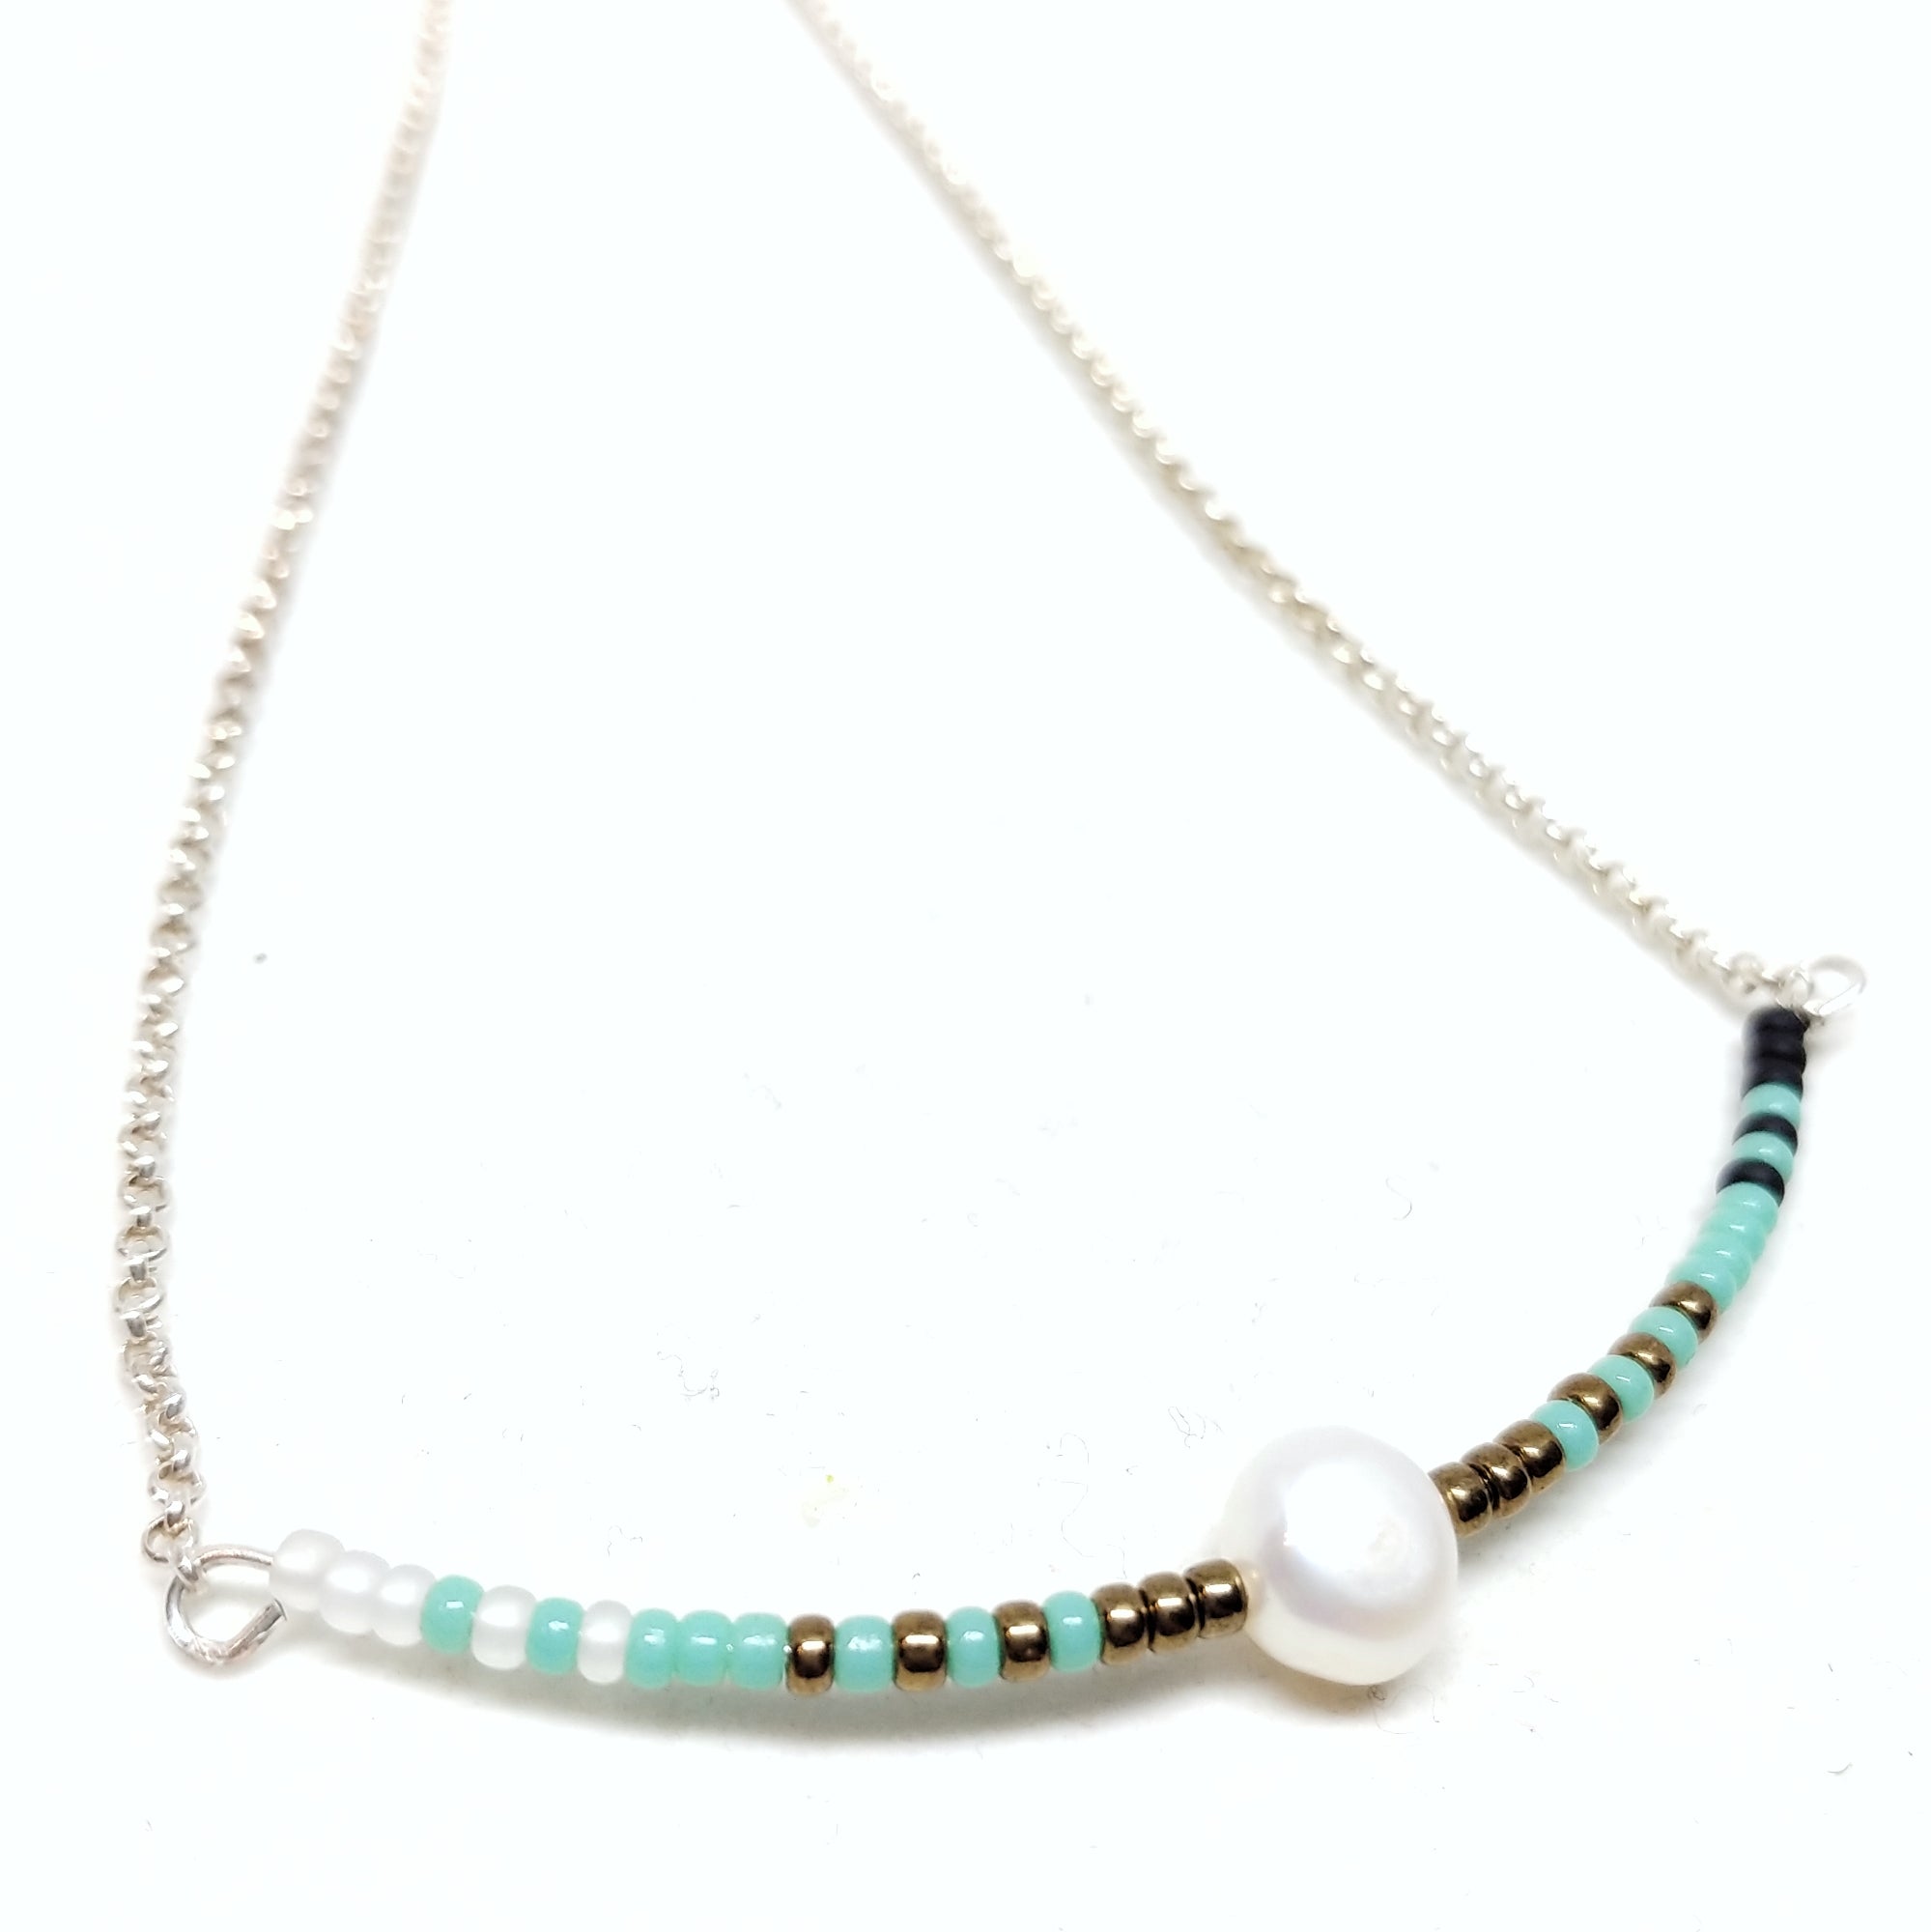 Calm necklace: Sterling silver chain with focal piece featuring white, turquoise, bronze and black seed beads with single pearl.